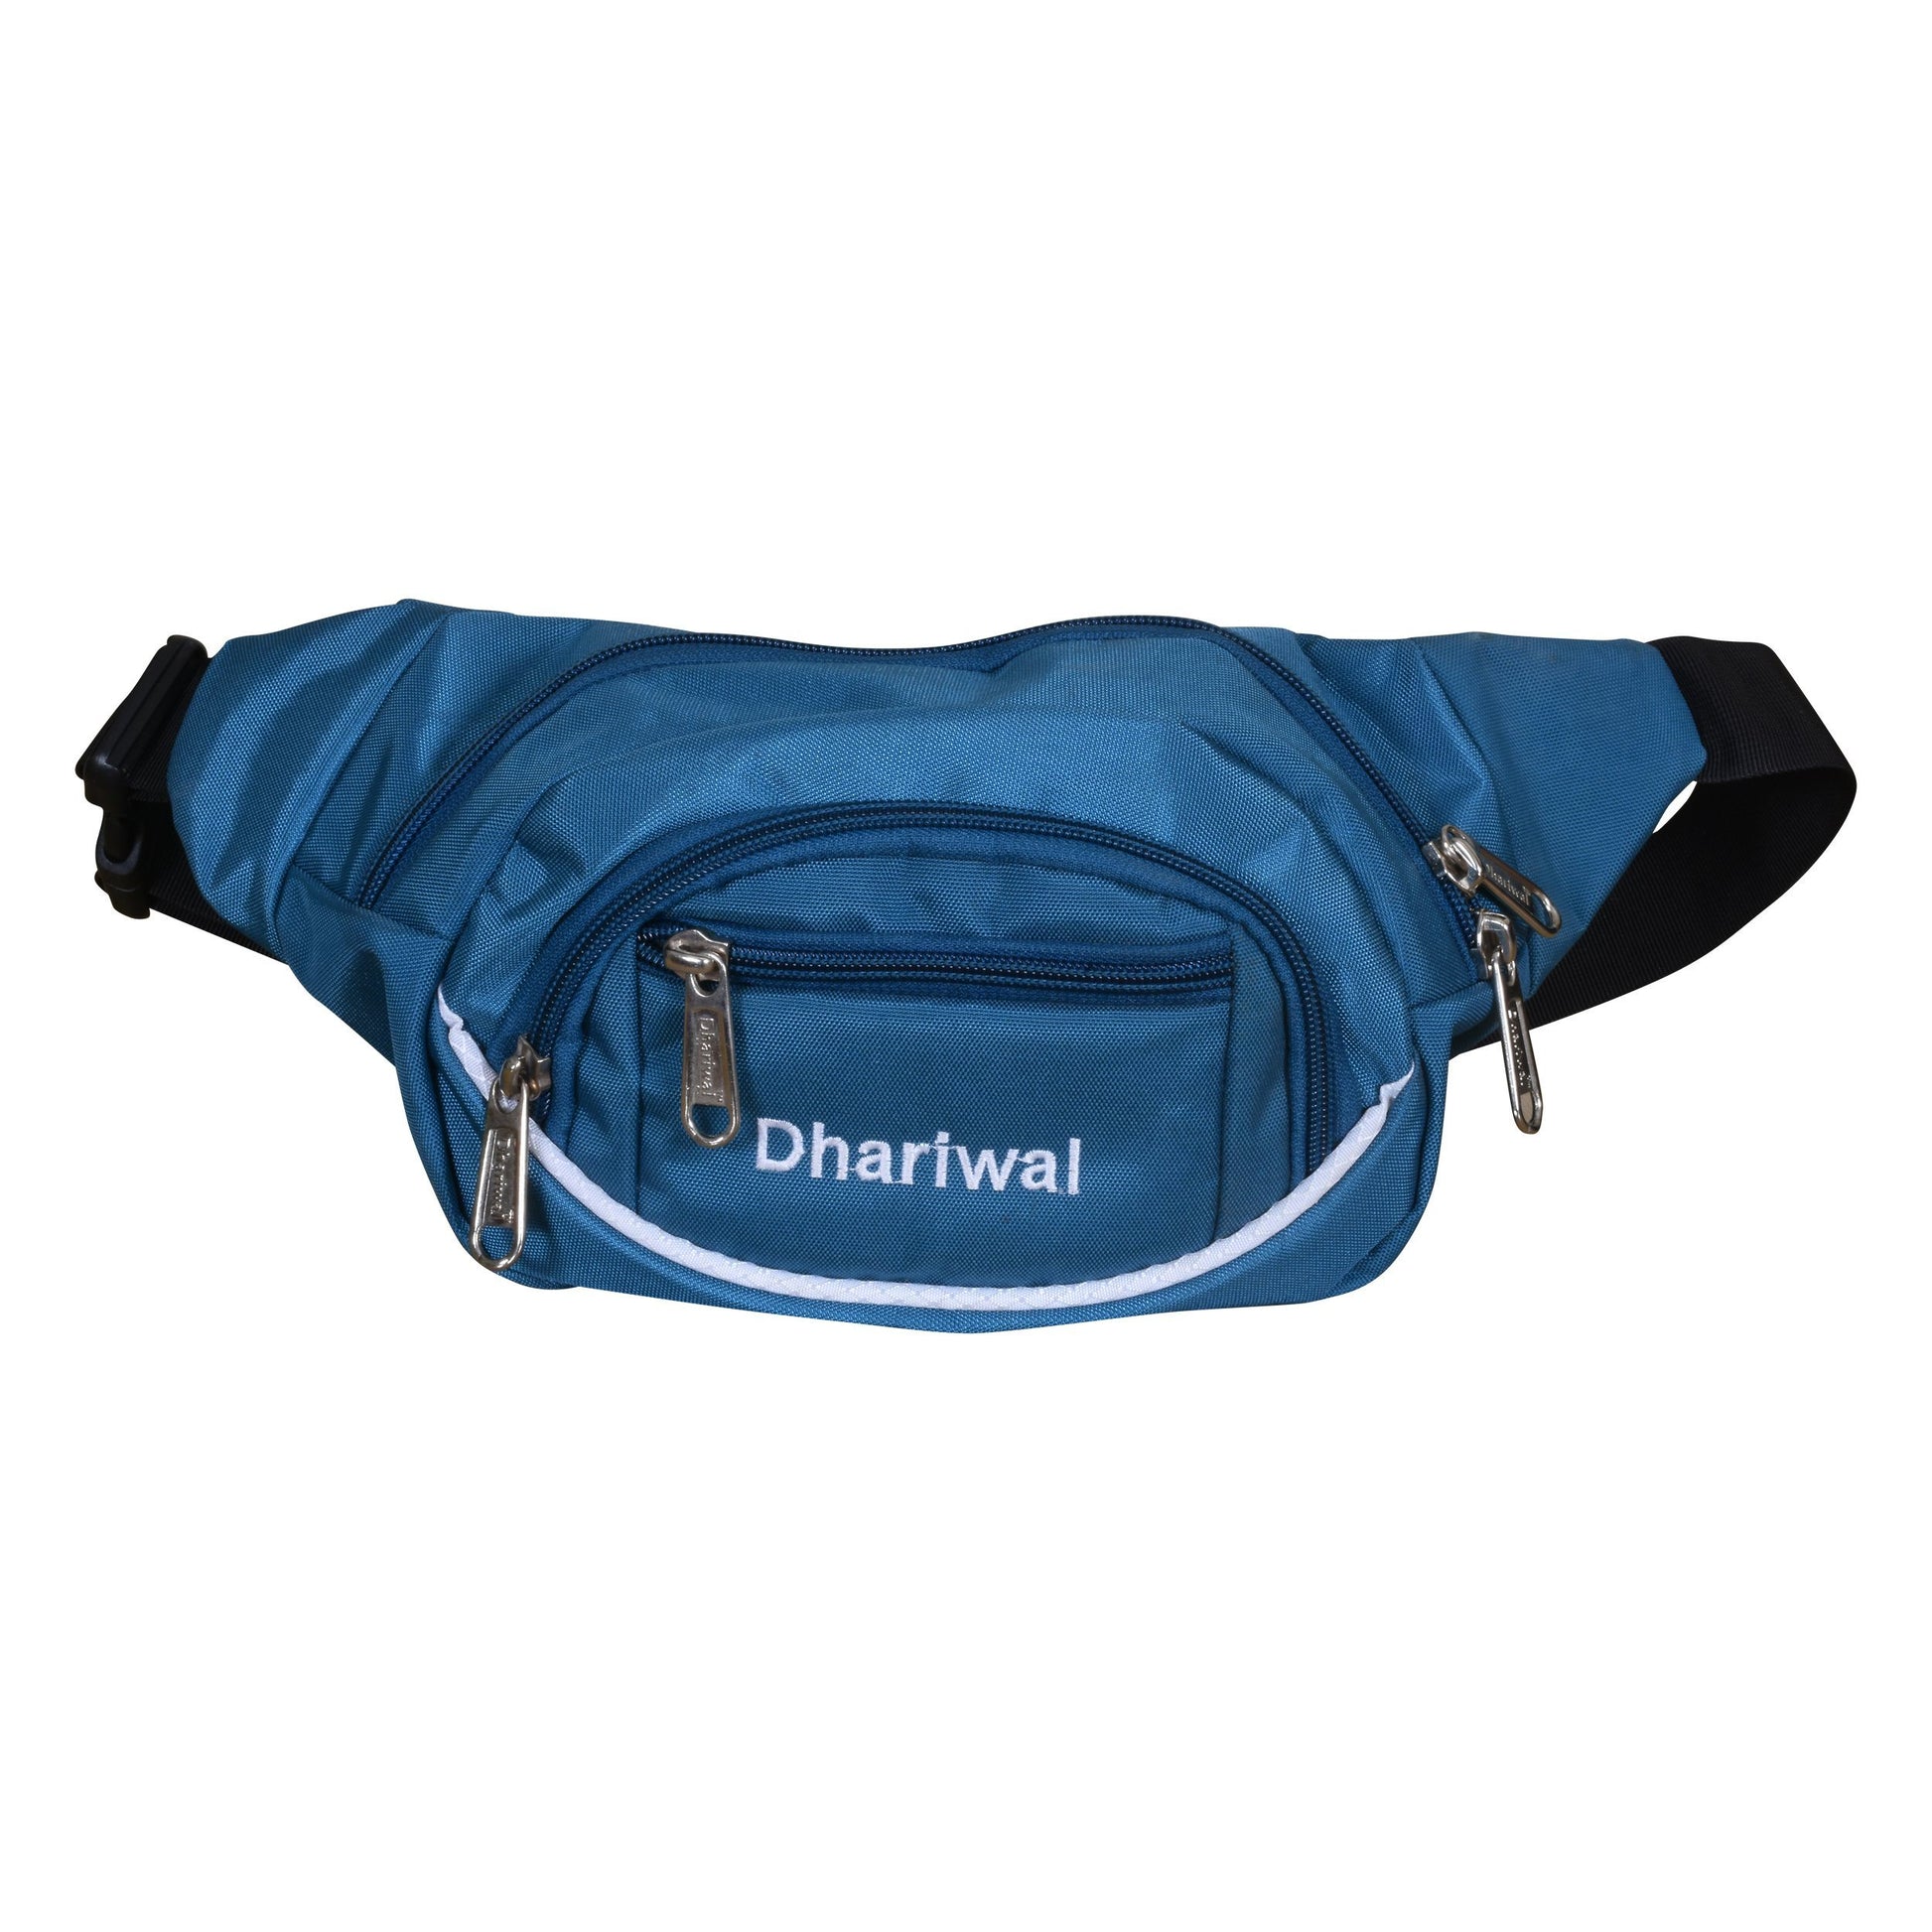 Dhariwal Waist Pack Travel Handy Hiking Zip Pouch Document Money Phone Belt Sport Bag Bum Bag for Men and Women Polyester WP-1202 Waist Pouch Dhariwal Teal 